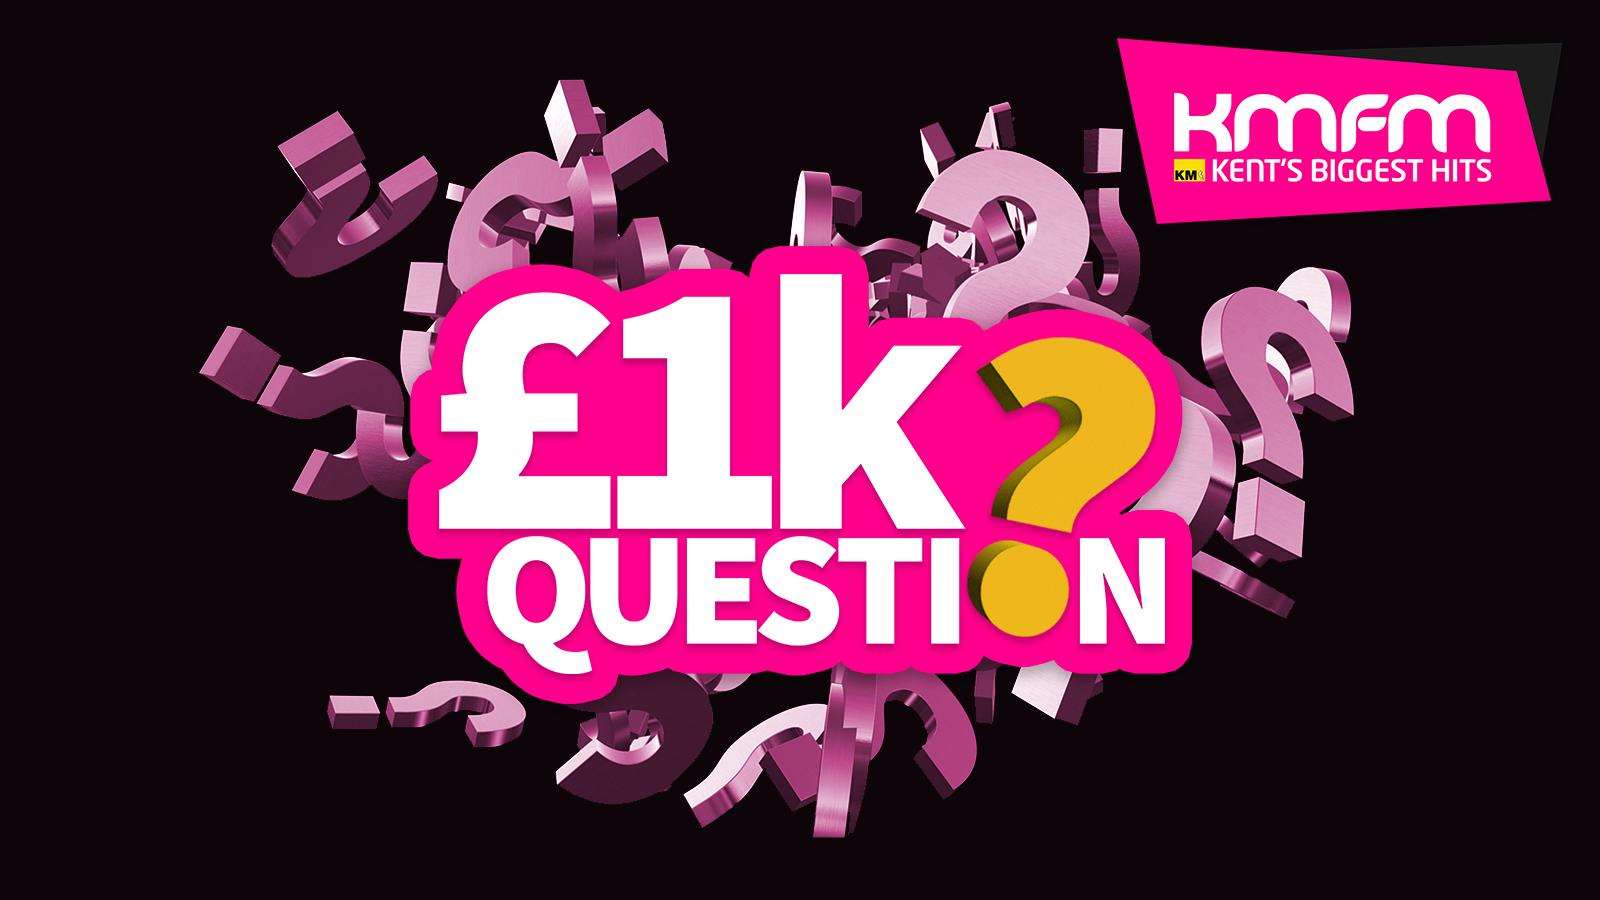 You could win the £1k Question on kmfm (7506013)